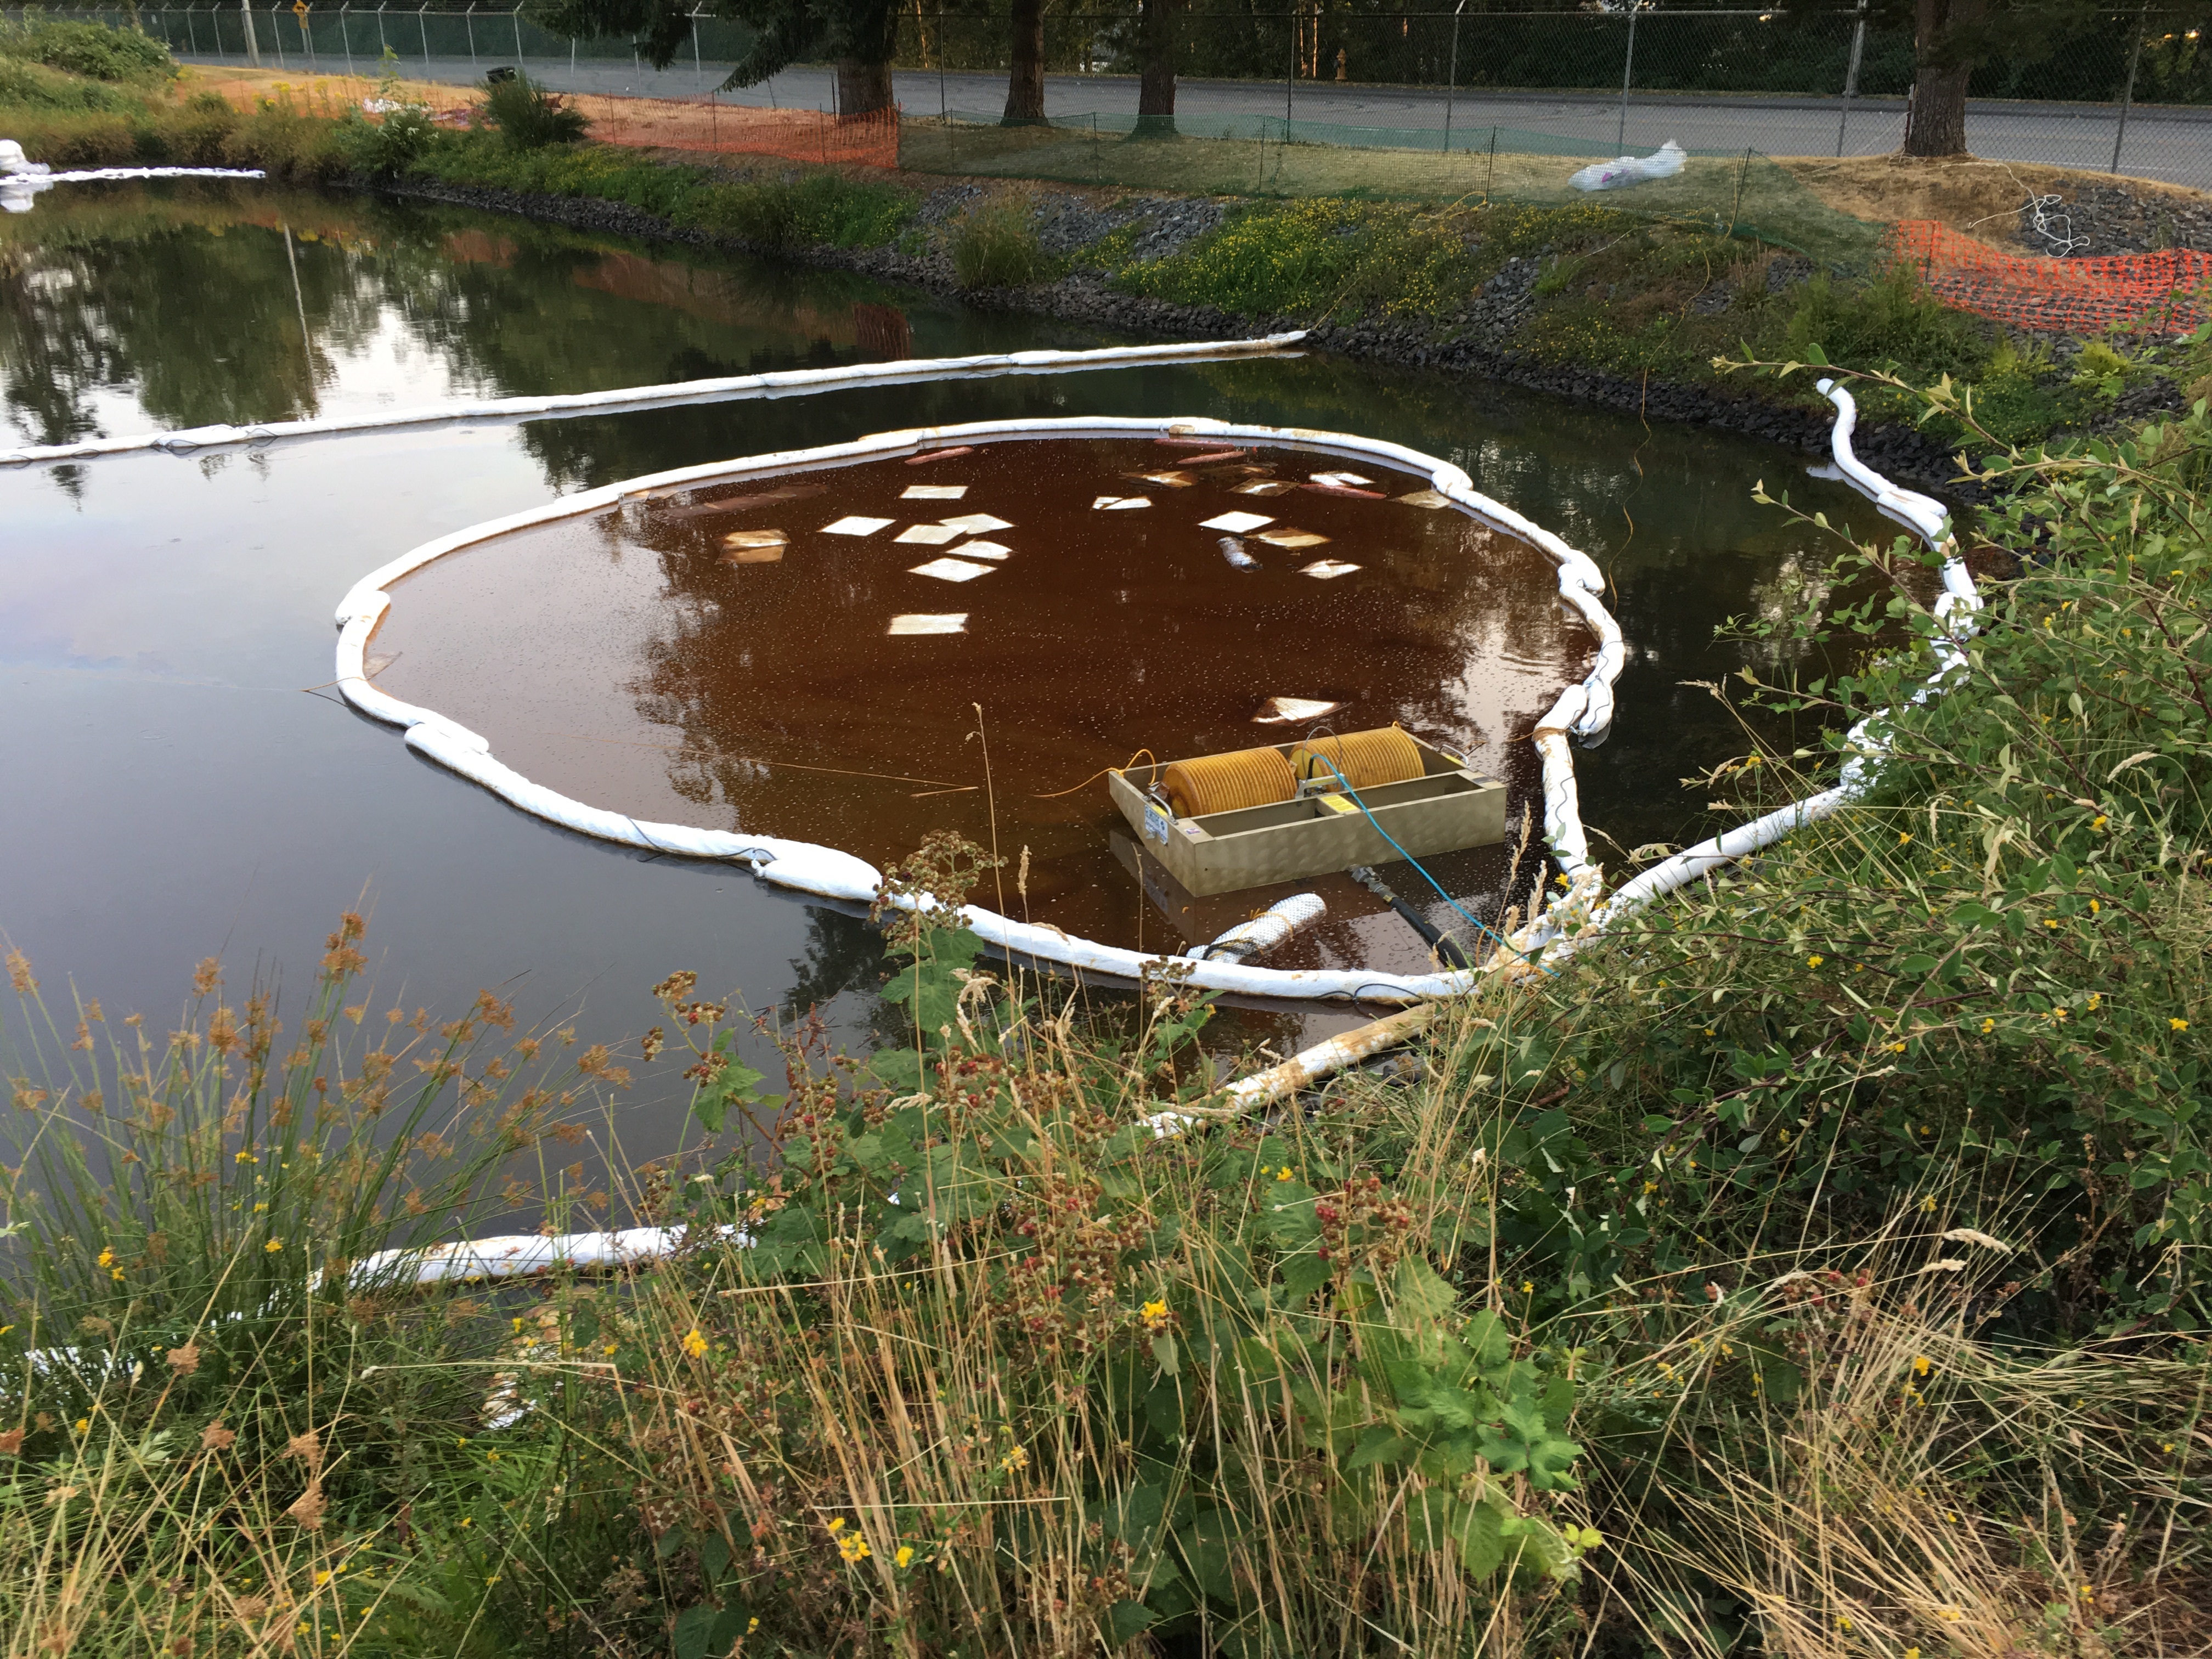 Absorbents surrounding oil in a stormwater pond.